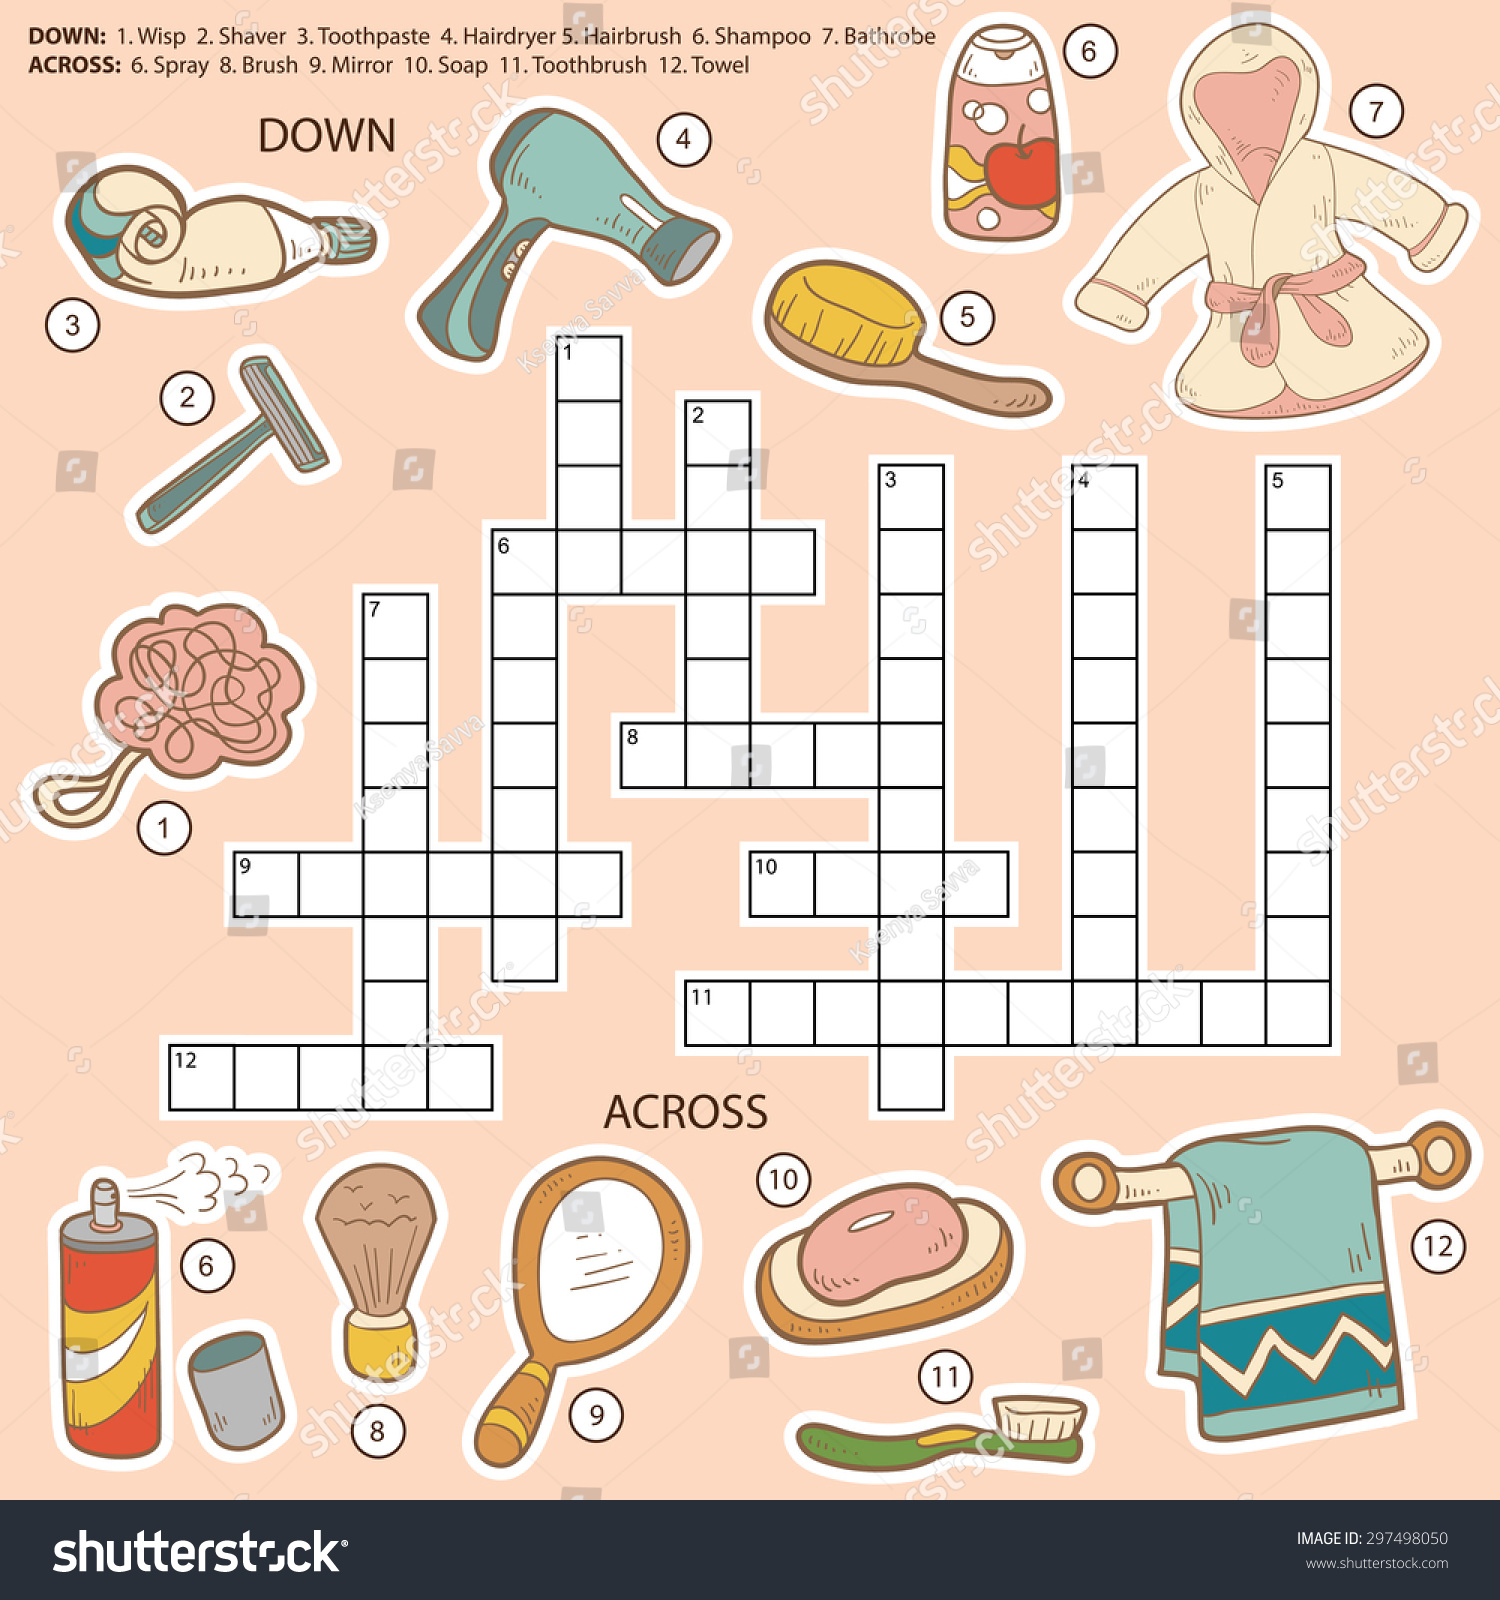 SVG of Vector color crossword, education game for children about bathroom and beauty items (wisp, shaver, toothpaste, hairdryer, hairbrush, shampoo, bathrobe, spray, mirror, soap, towel) svg